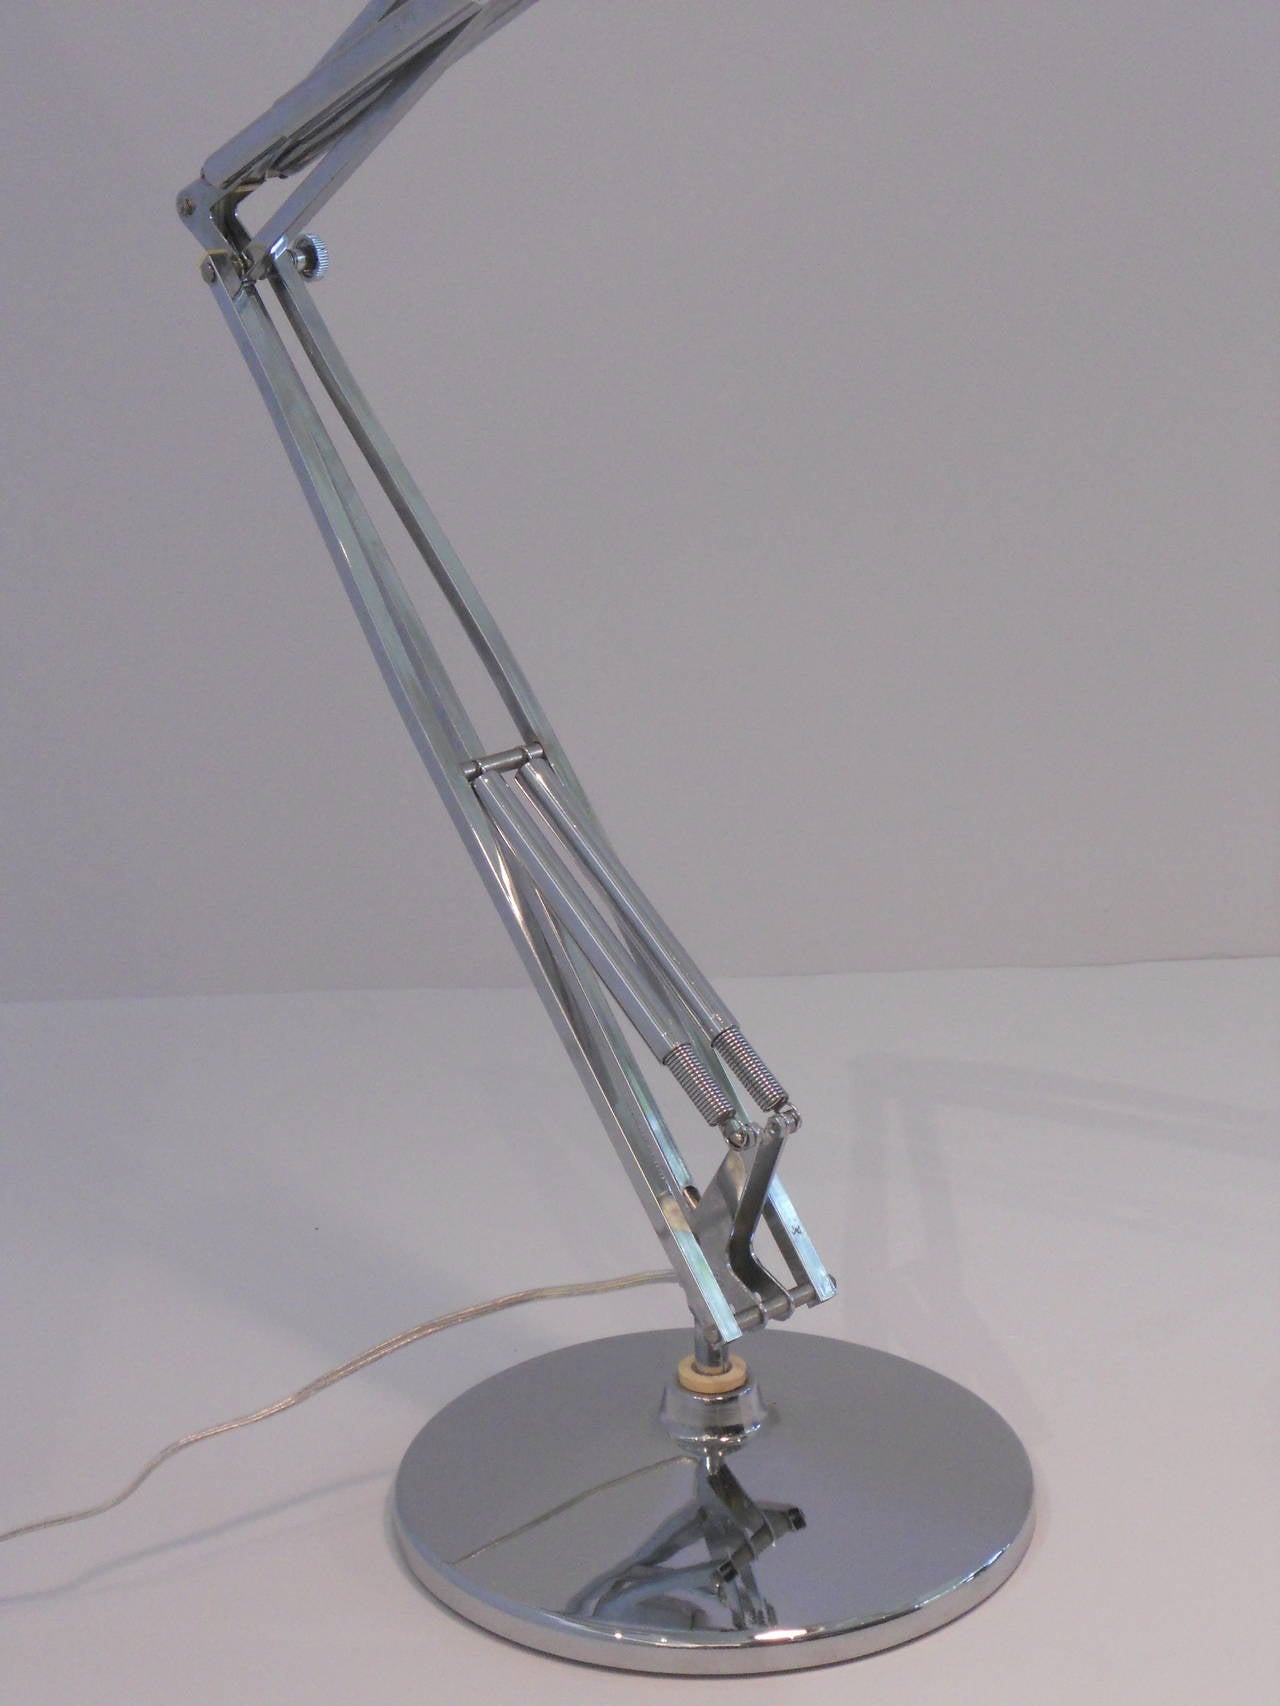 Exceptionally heavy articulated chrome desk lamp with a modern chrome shade. Lamp is on a weighted chrome base and has spring construction on the articulated arm with an on/off switch at the top of the metal shade.